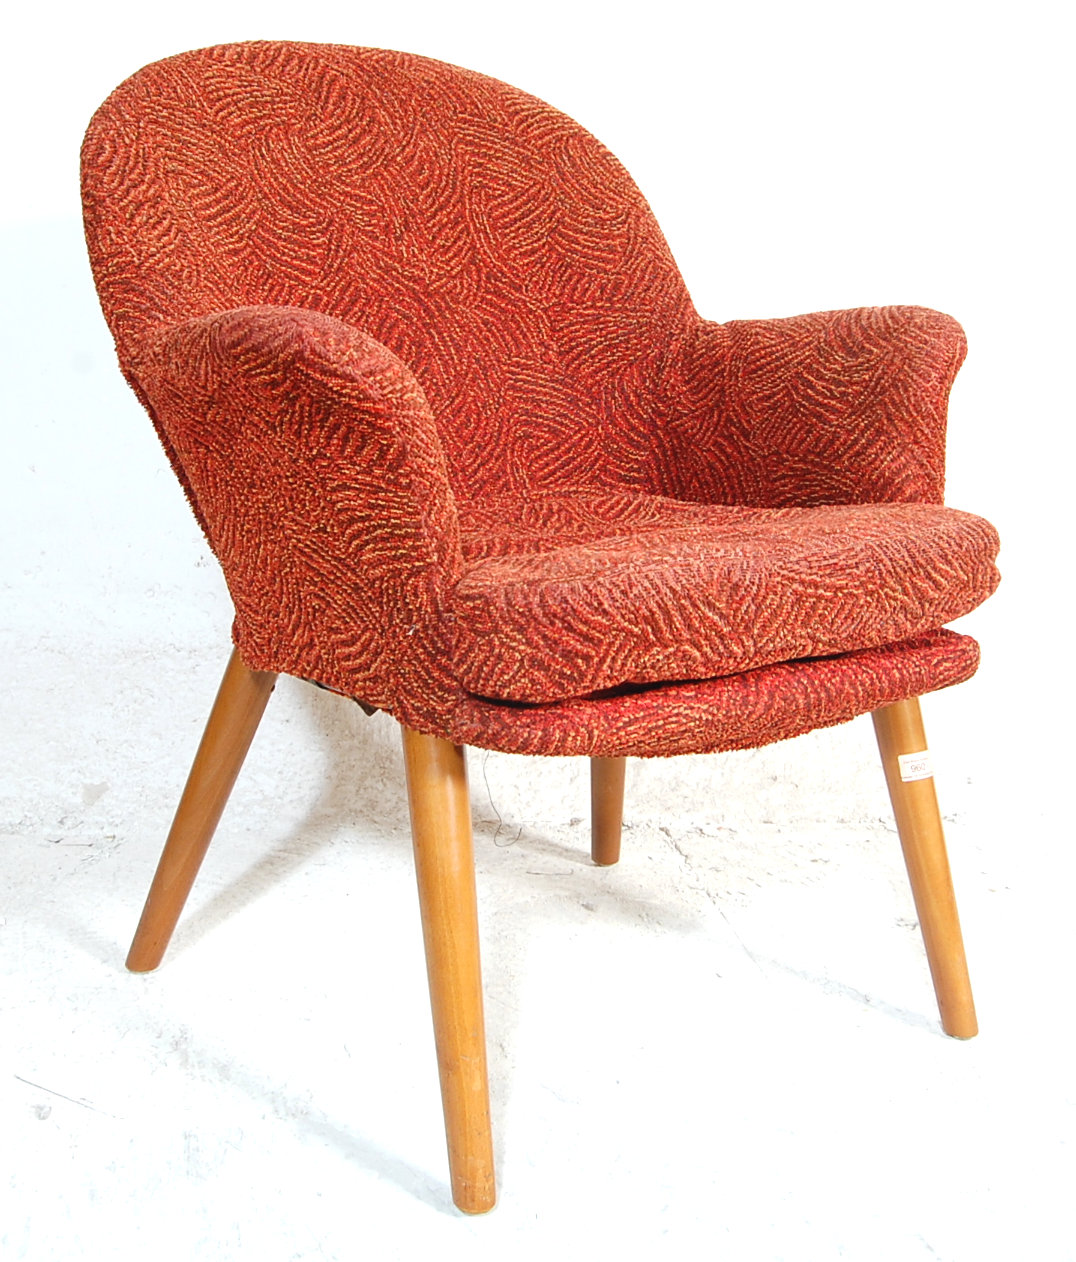 VINTAGE 20TH CENTURY TUB CHAIR WITH RED UPHOLSTERY AND TURNED SUPPORTS